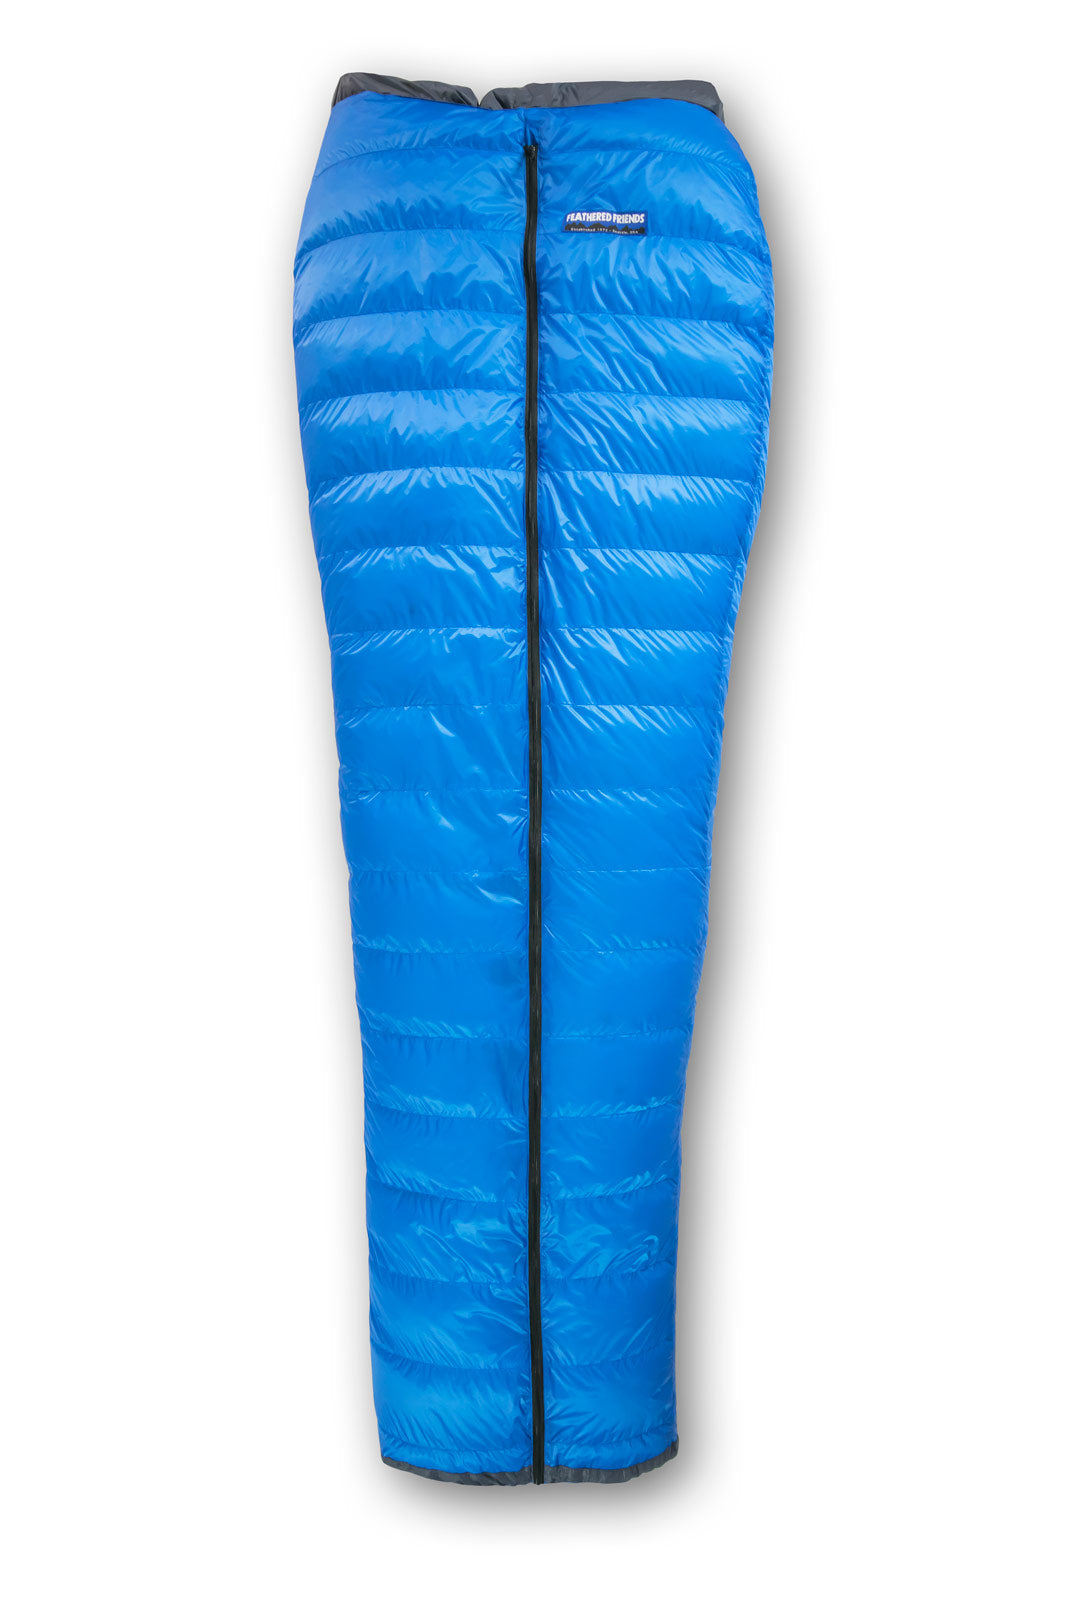 The 4 Best Sleeping Bags for Women of 2023 | Tested by GearLab